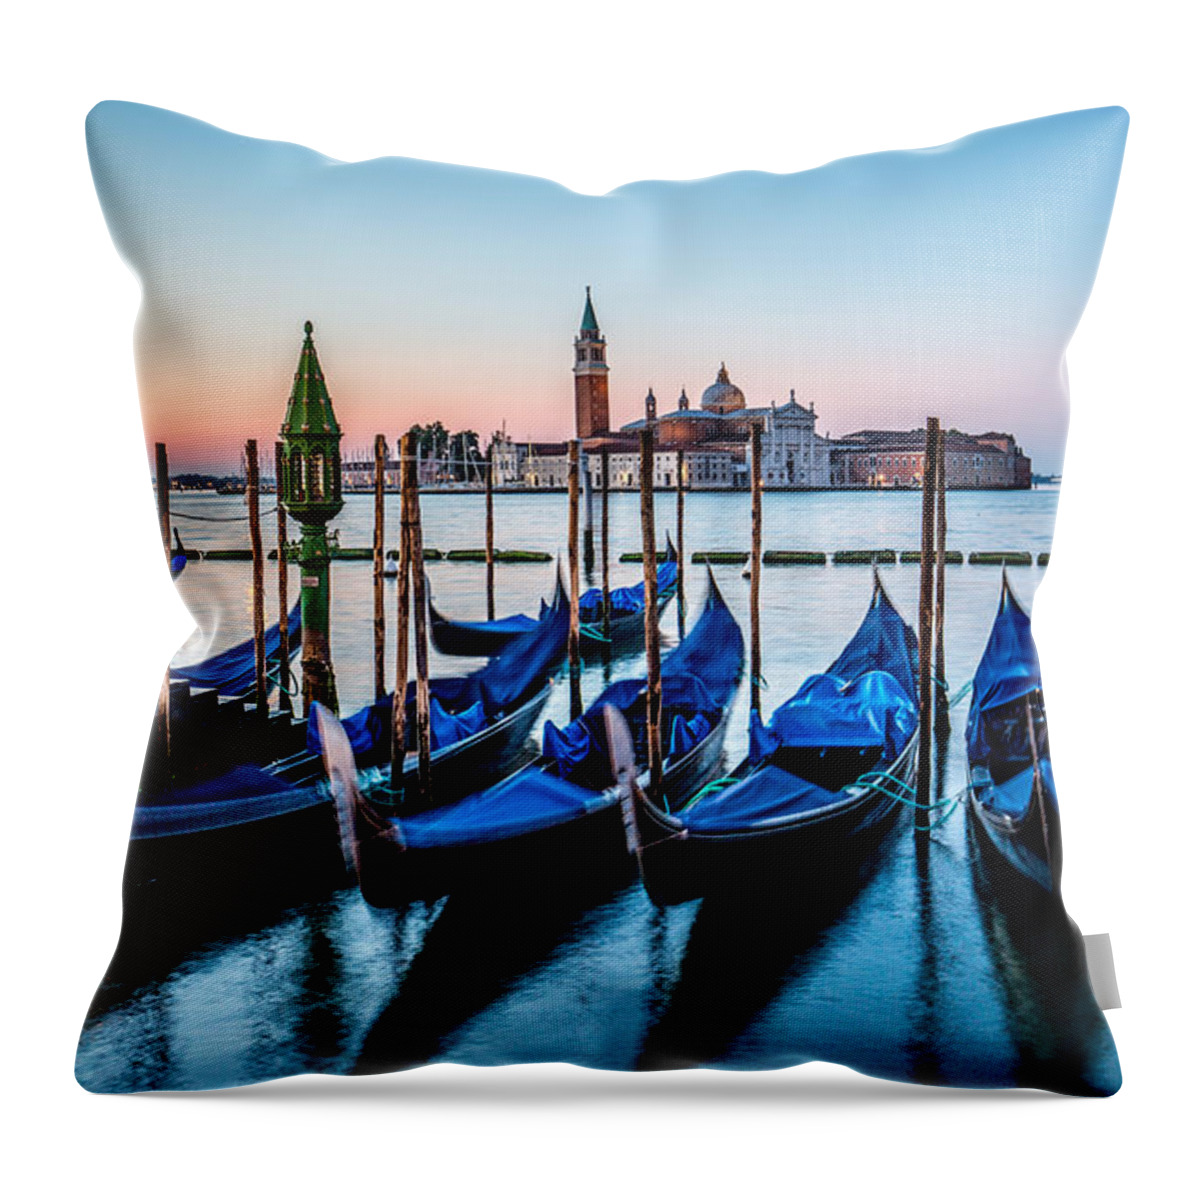 Venice Throw Pillow featuring the photograph Grand Canal in Venice by Lev Kaytsner